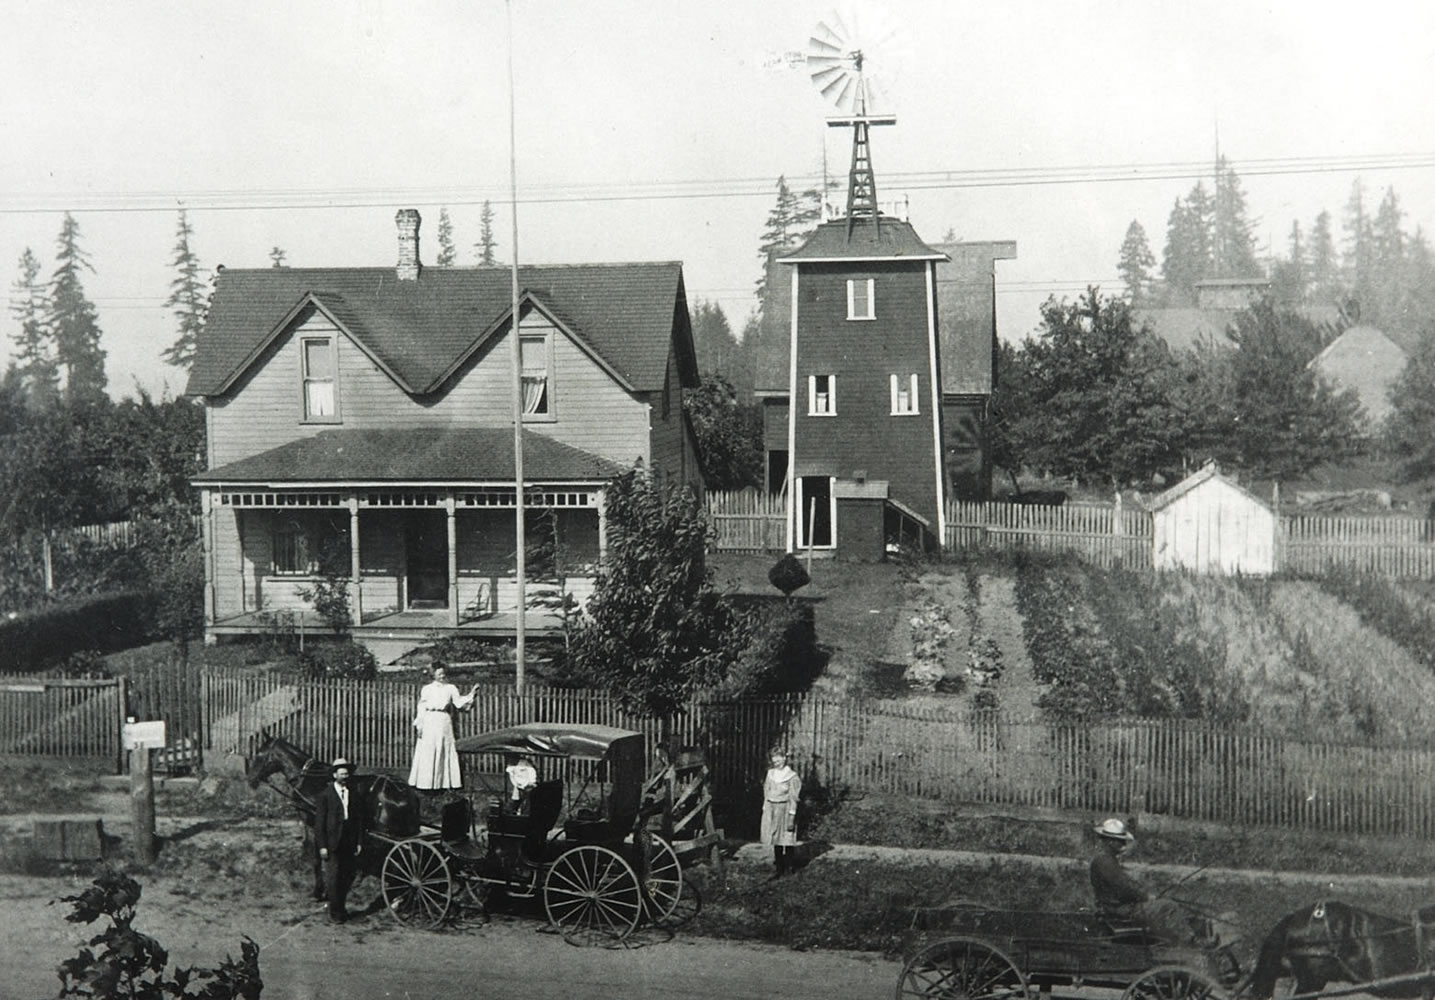 Felida: This photograph of Erickson Farms was taken in 1905, just a few years after the place was established. Standing on the walk near the center of the frame is Ruth Anderson, mother of Vinton Erickson.